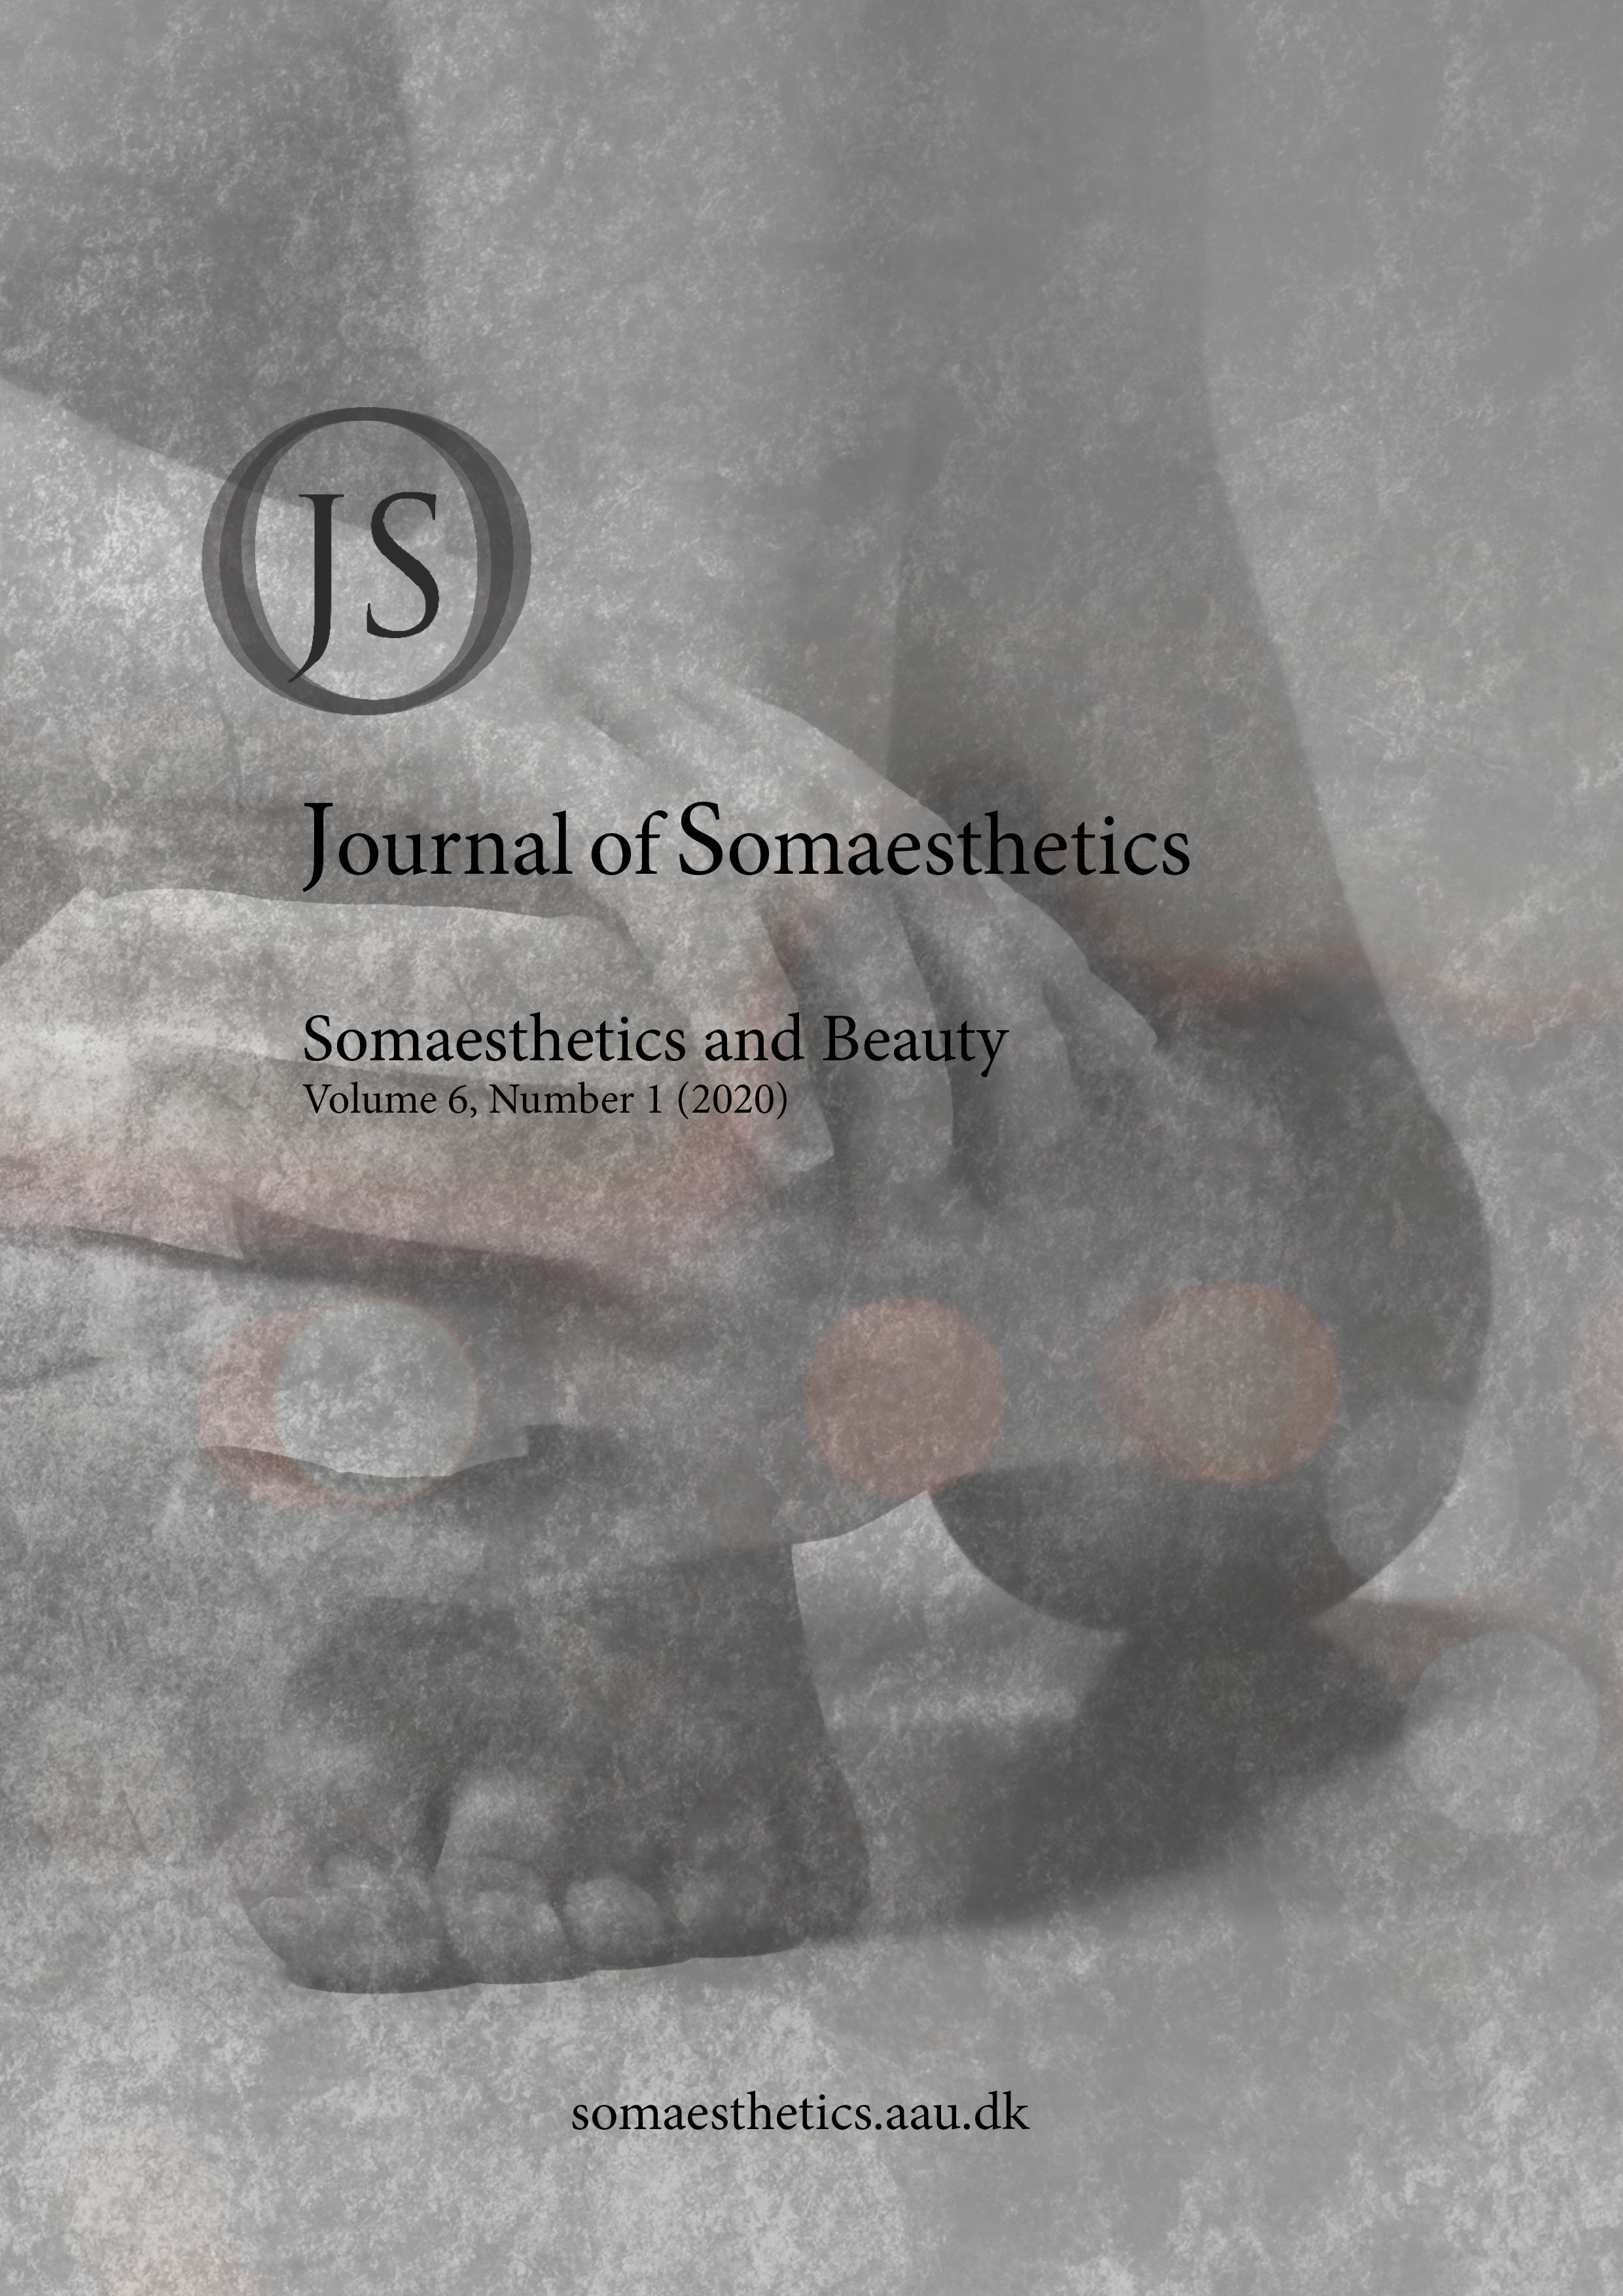 					View Vol. 6 No. 1 (2020): Somaesthetics and Beauty
				